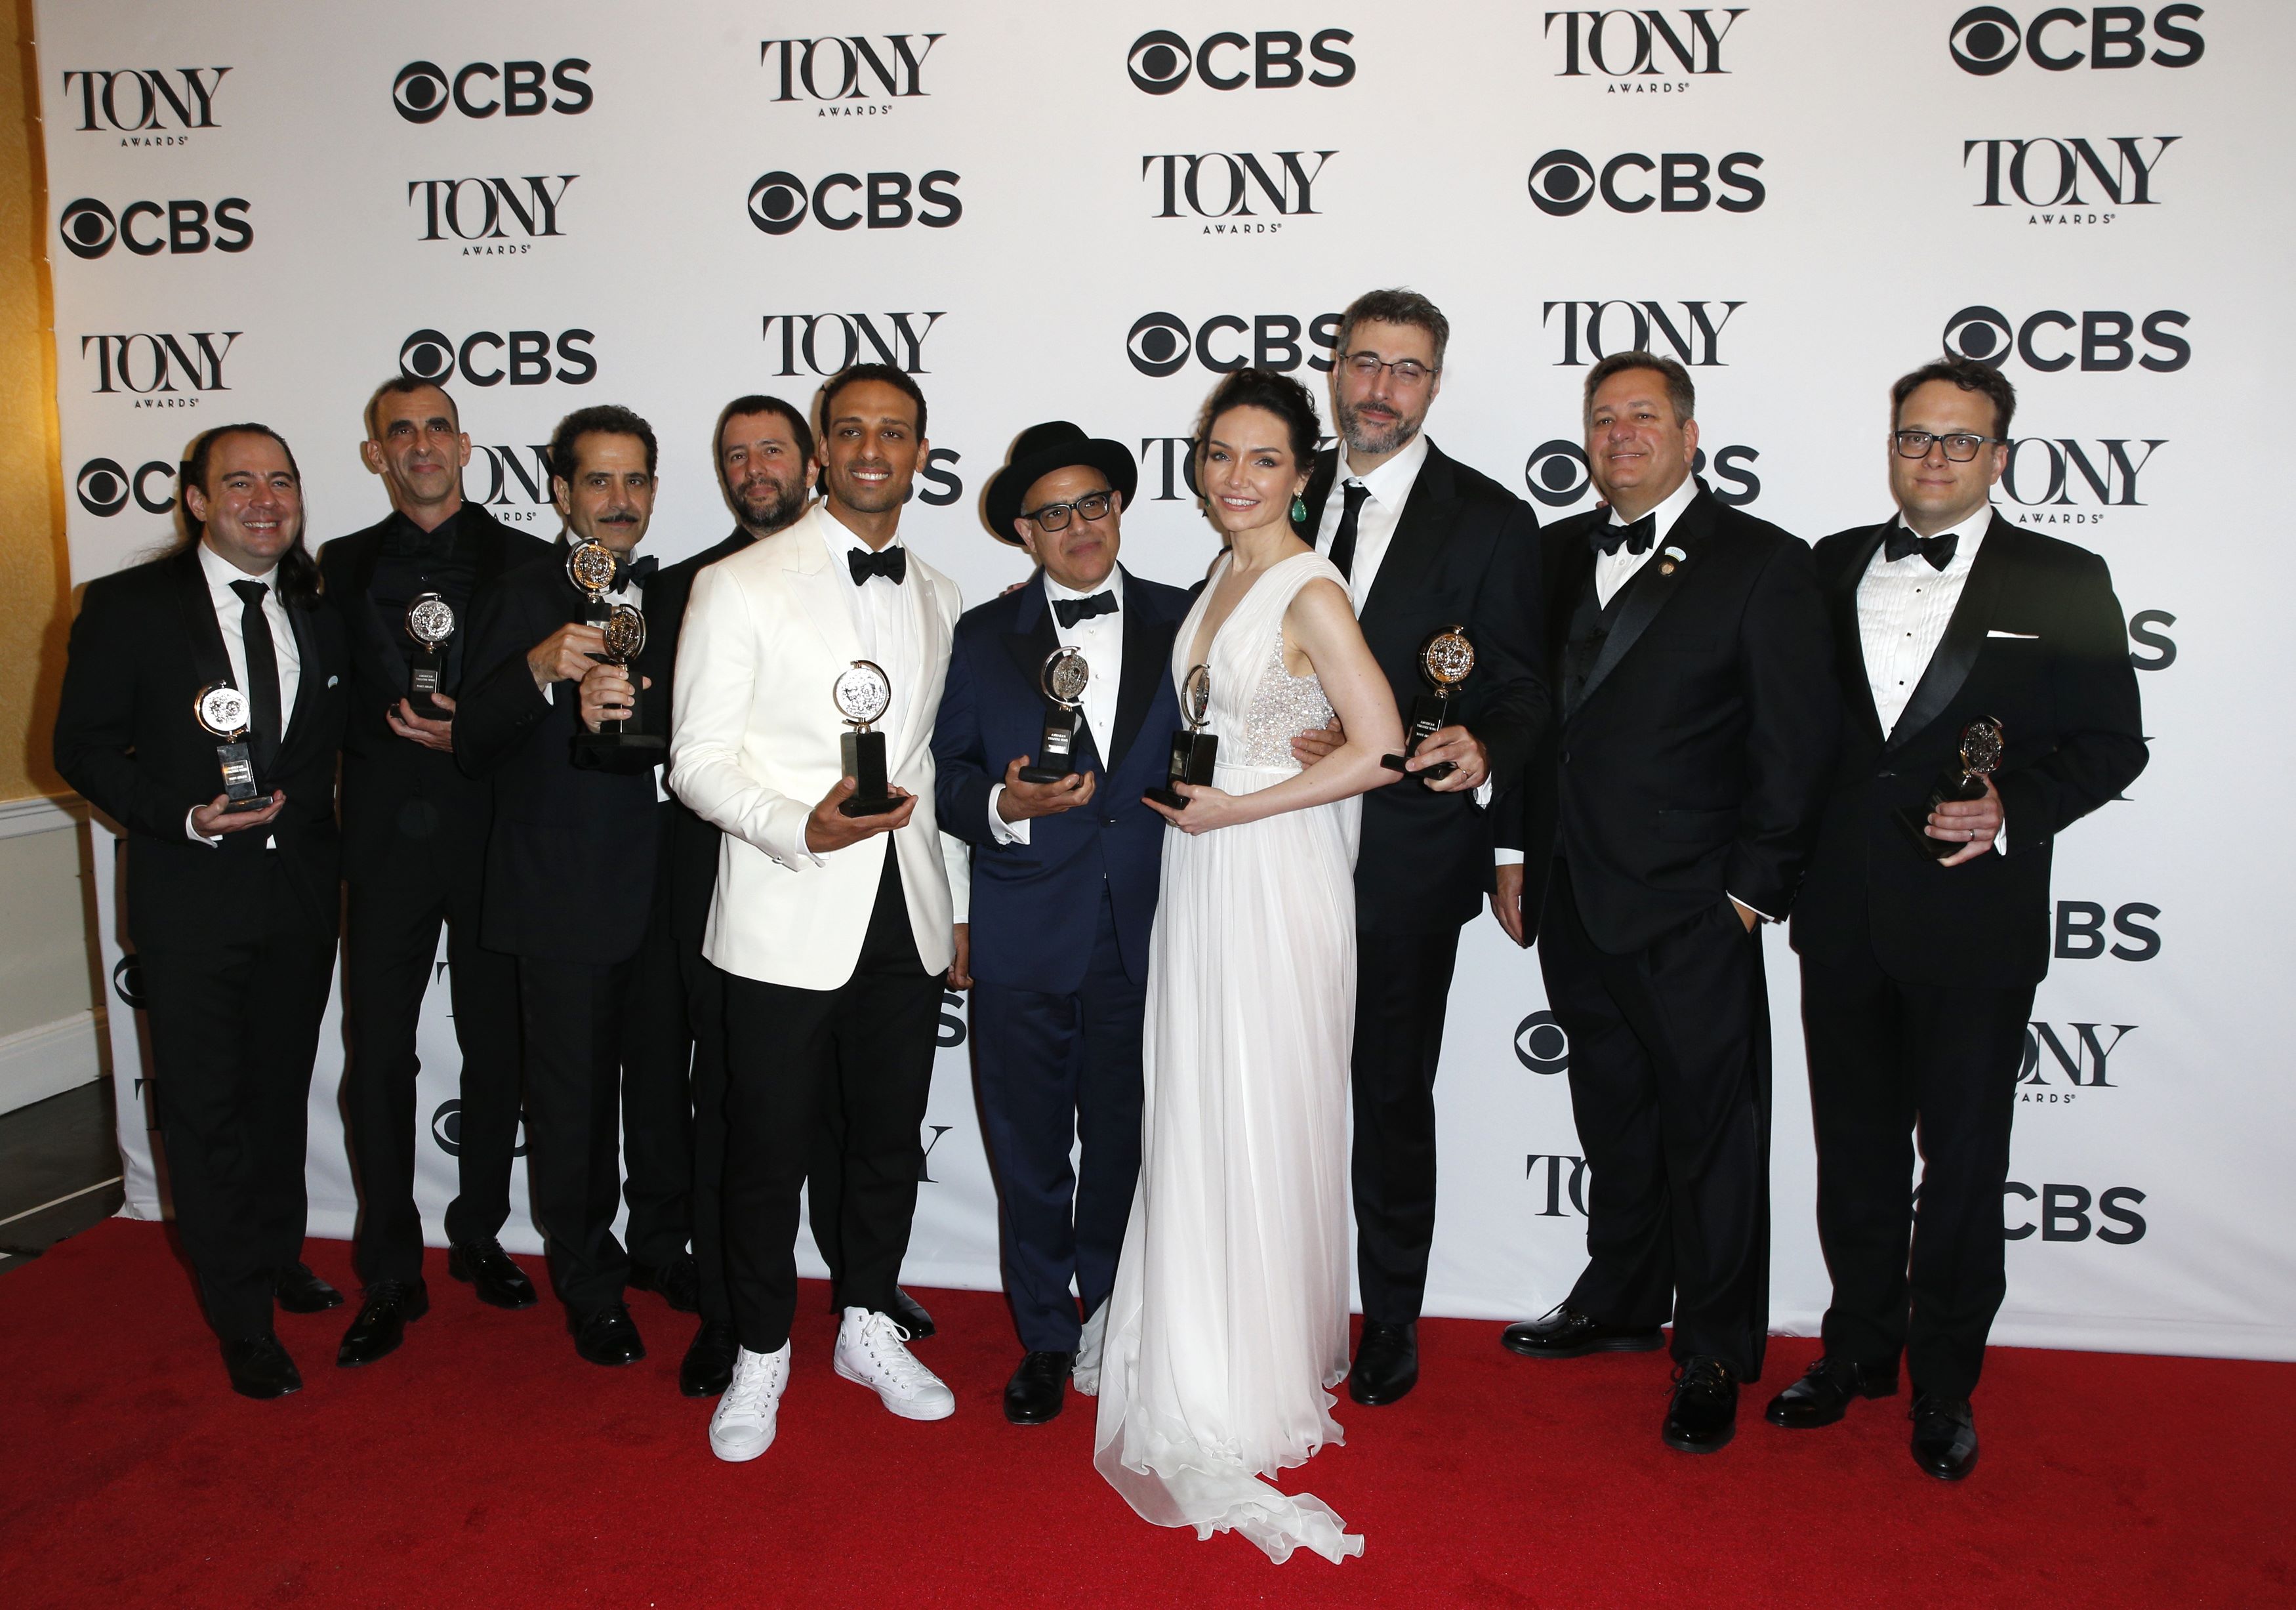 'The Band's Visit' sweeps Tony Awards as 'Harry Potter' wins best play